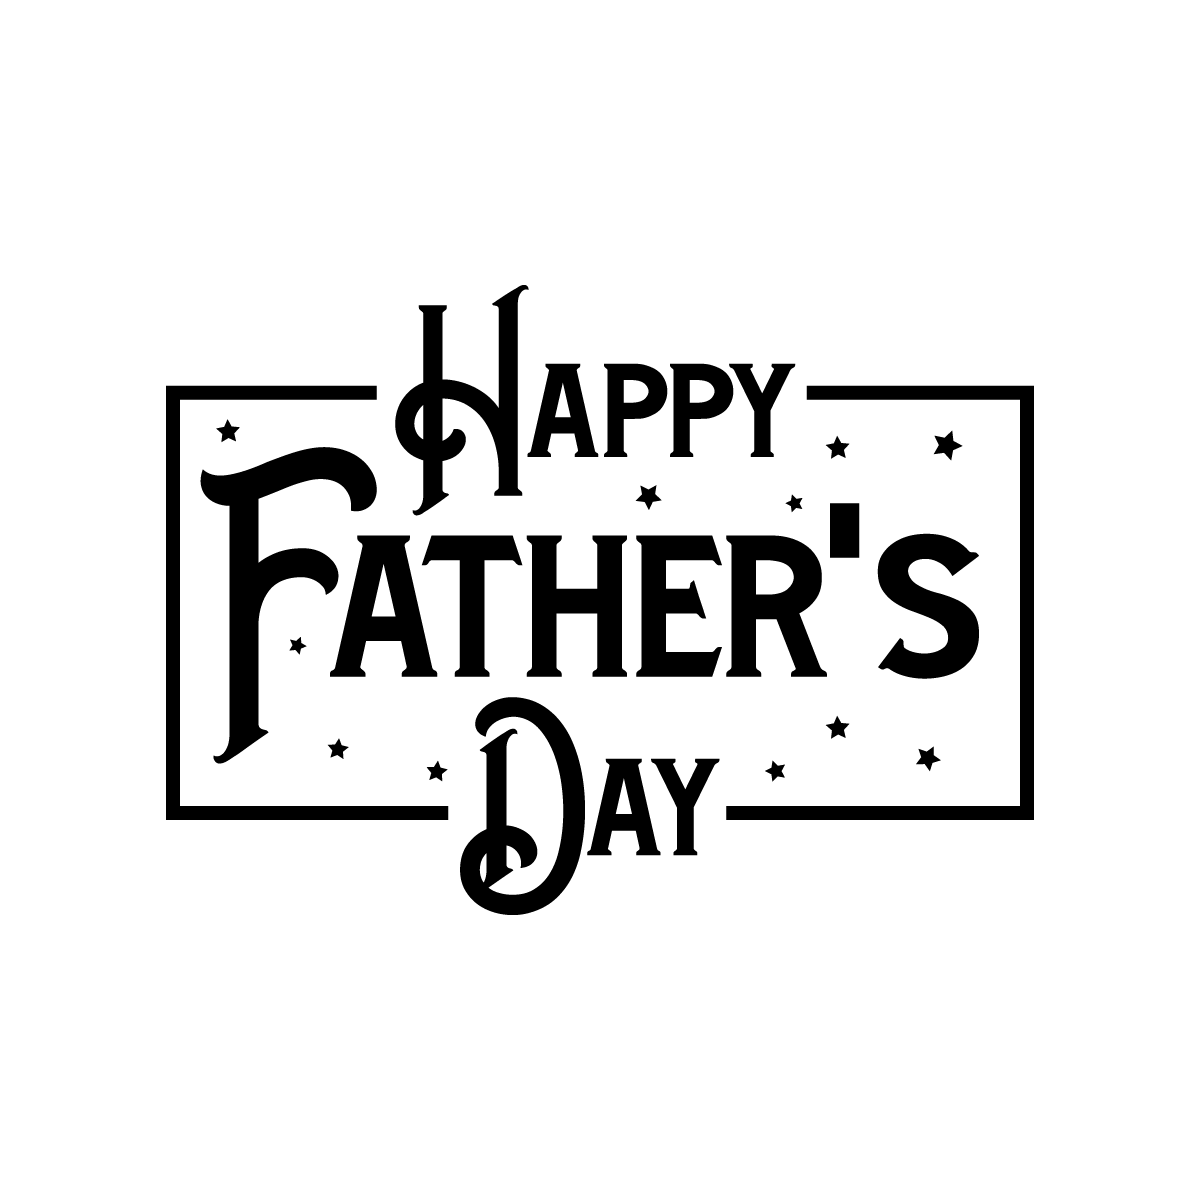 Father's Day logo.